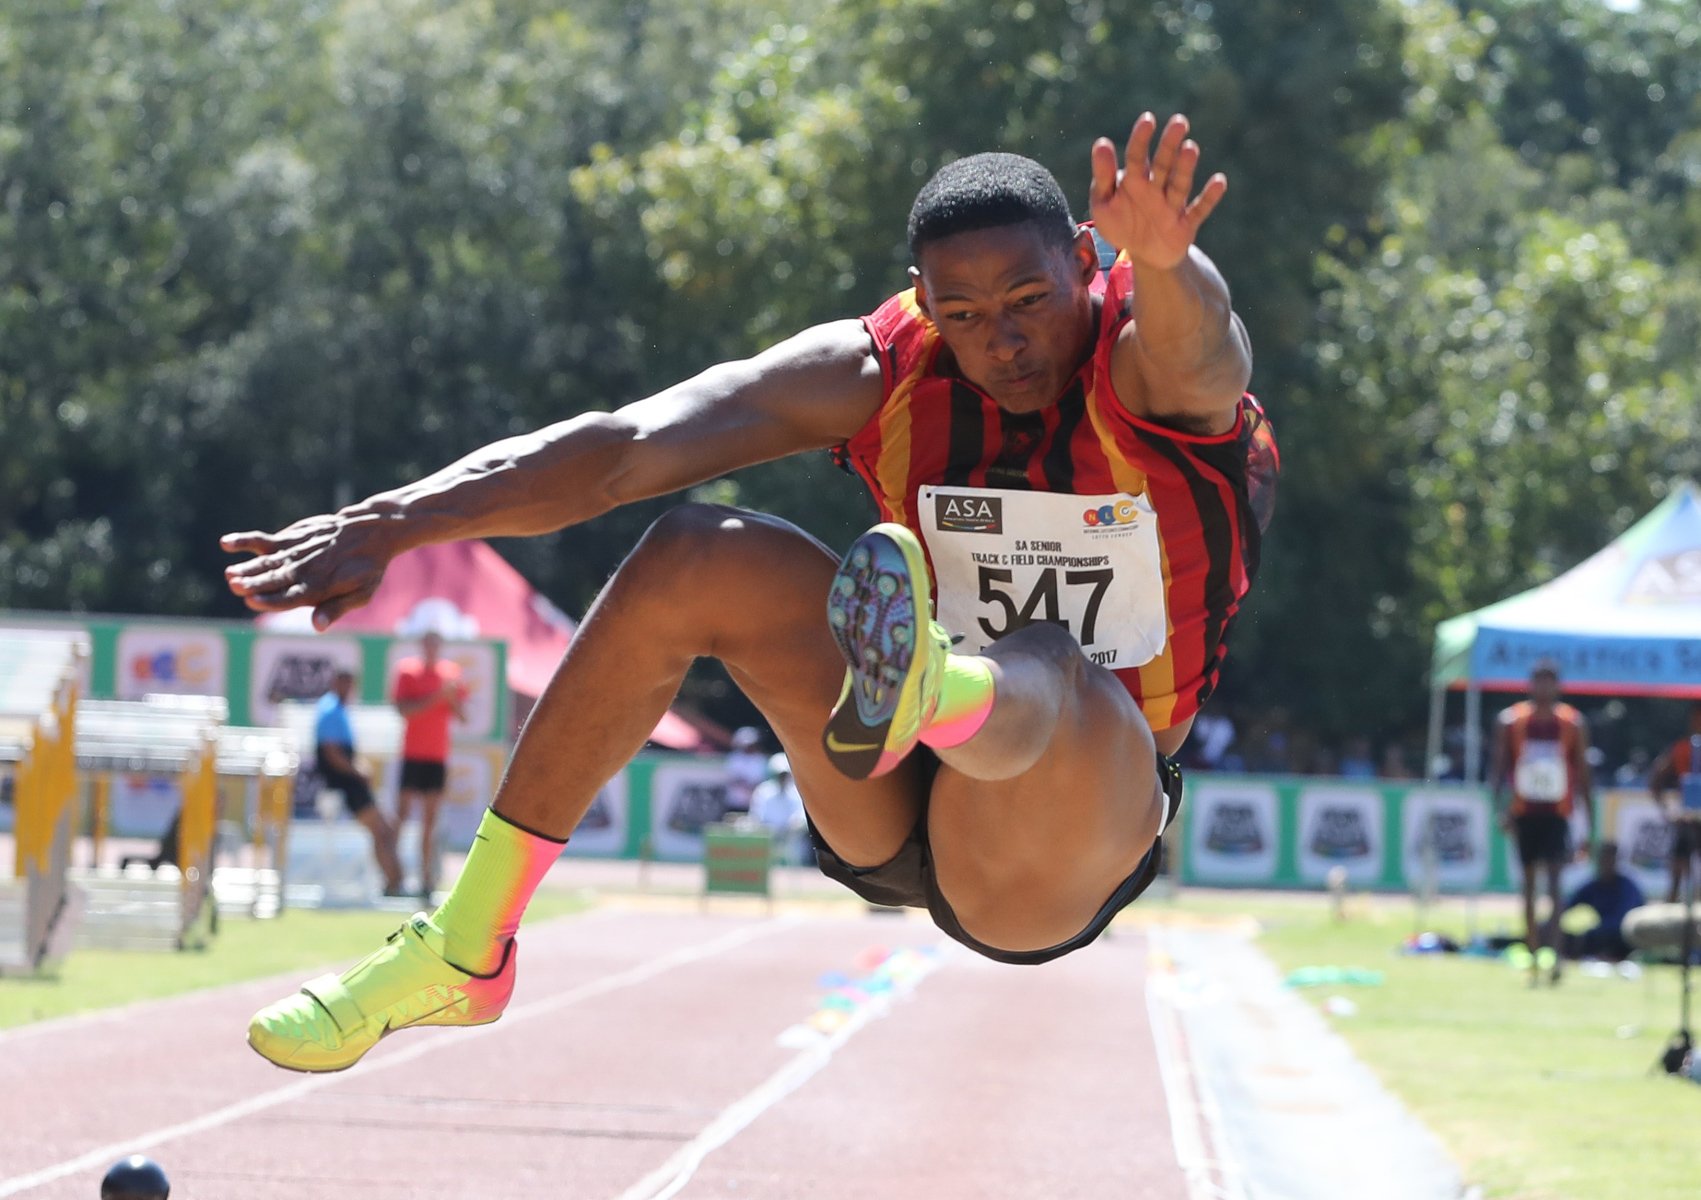 World long Jump bronze medallist, Ruswahl Samaai, will compete at the Athletix Grand Prix. Photo Credit: Roger Sedres